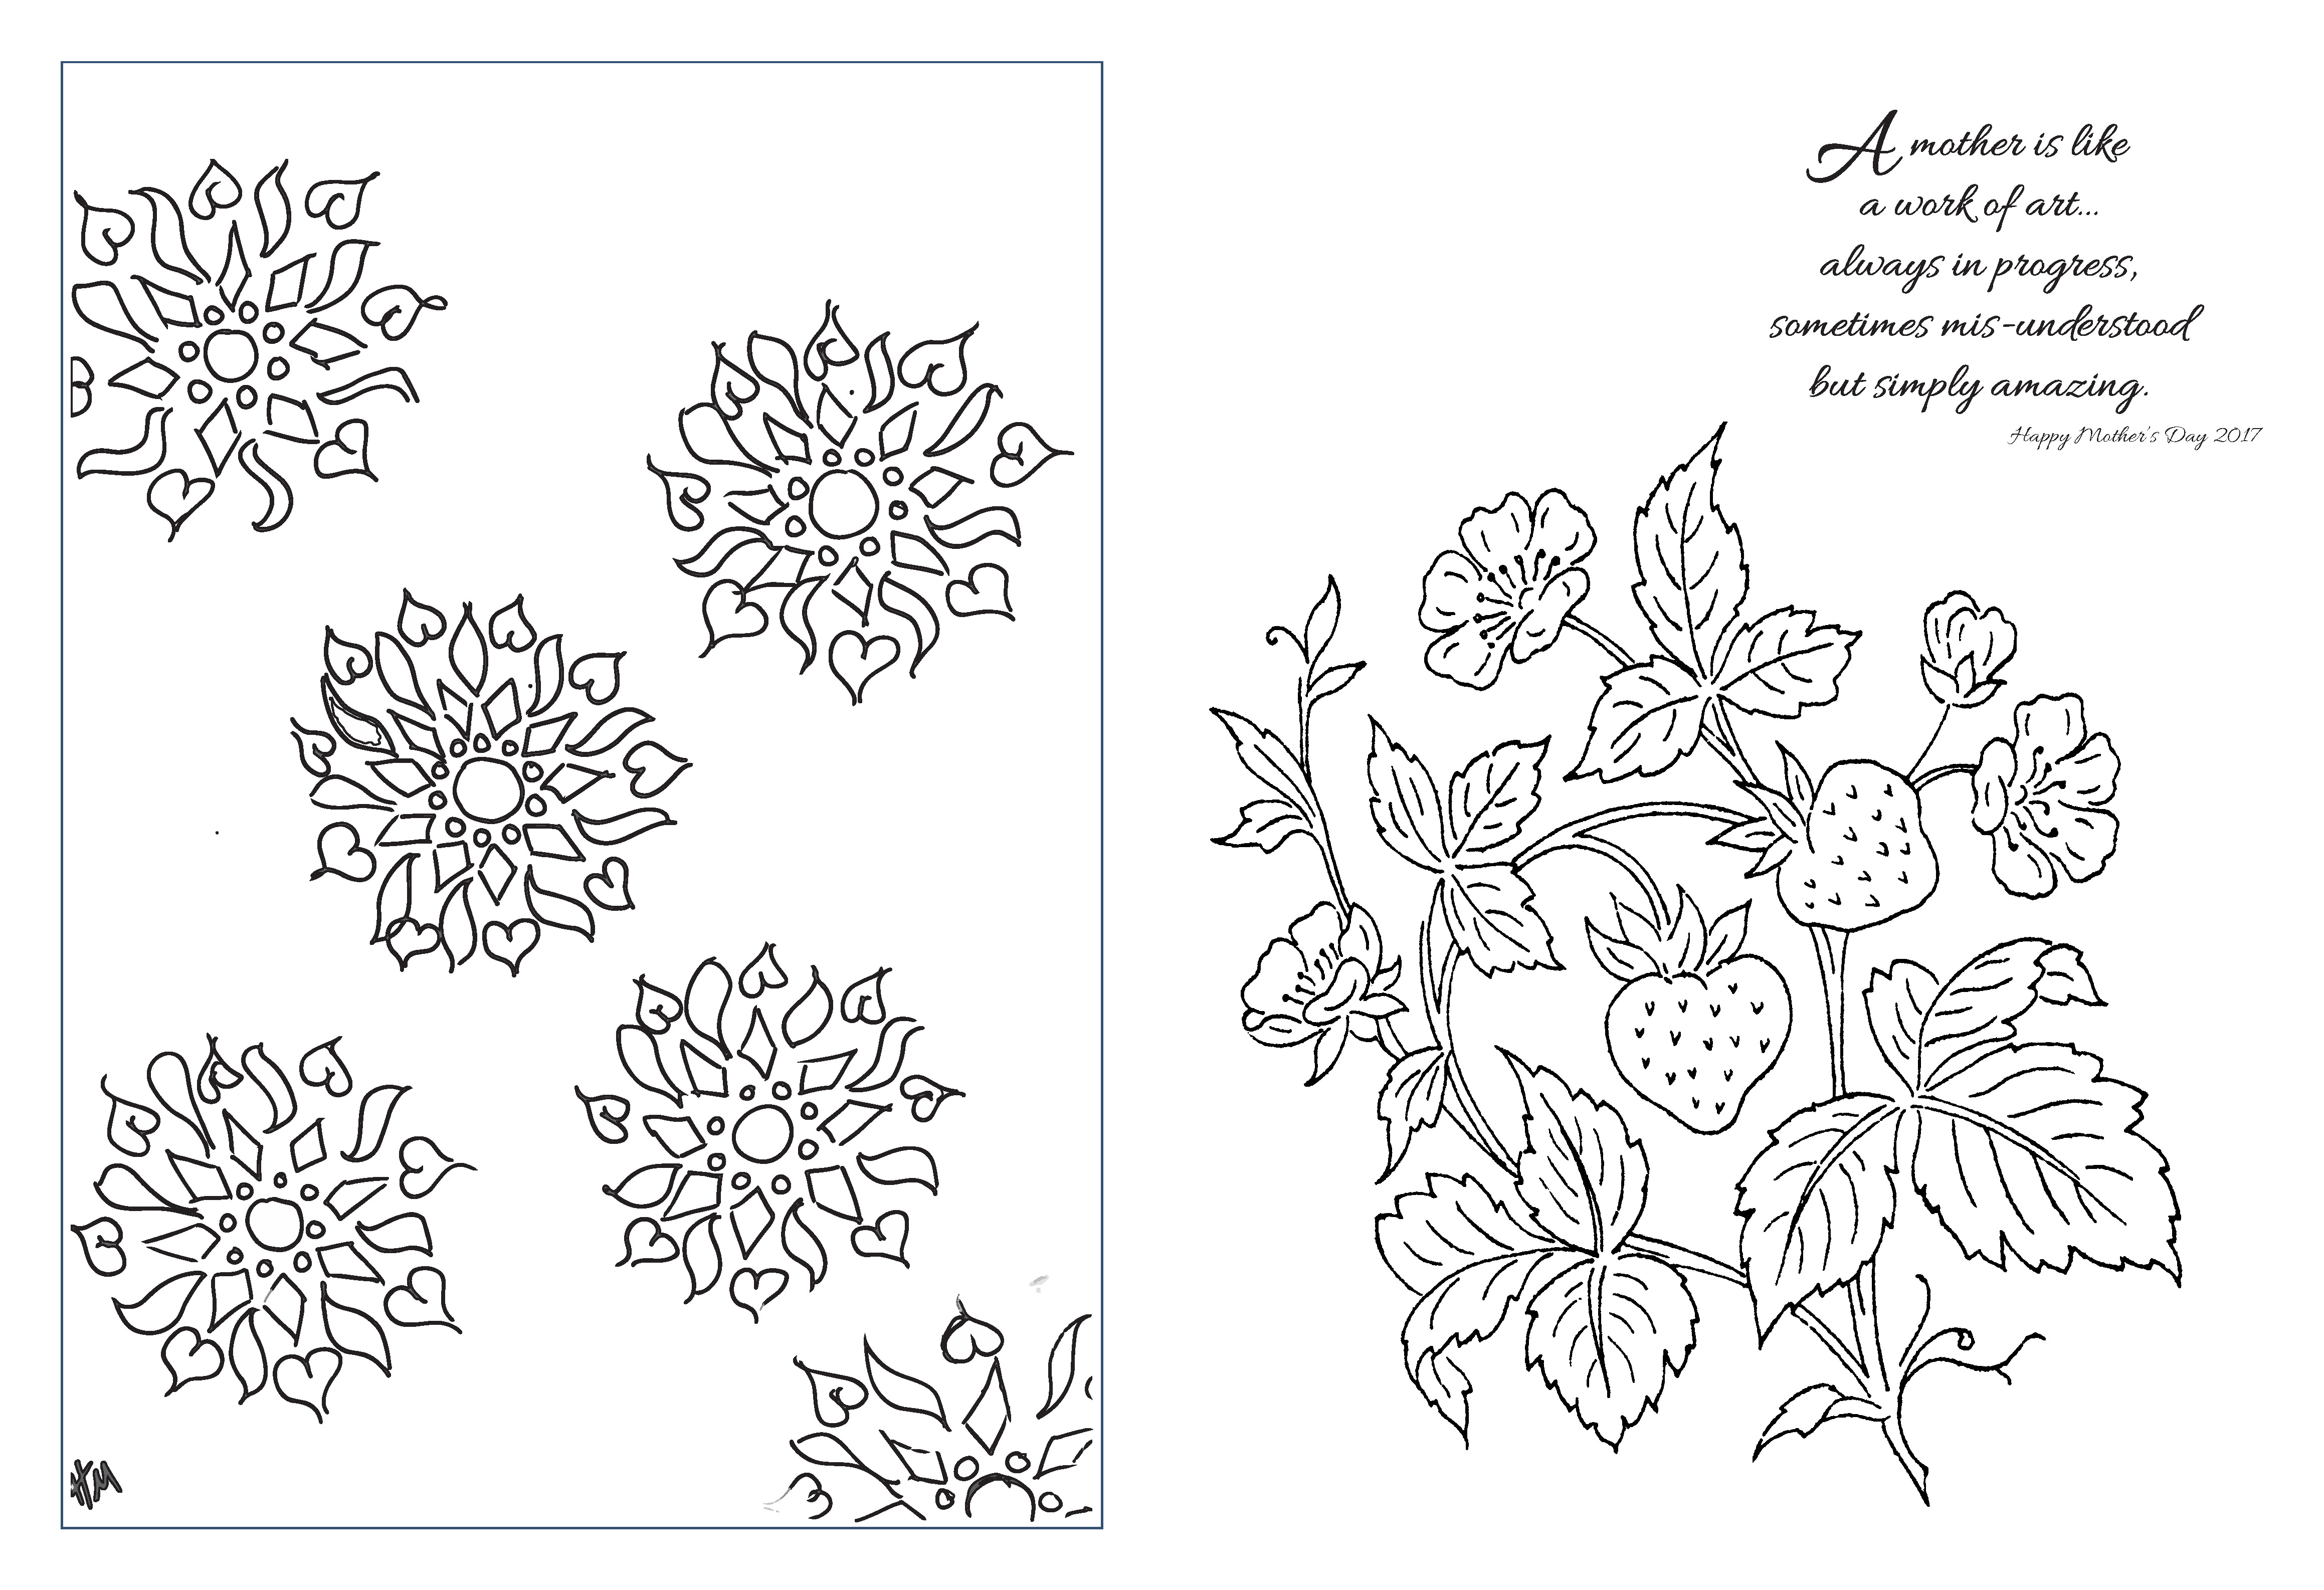 Coloring Book Illustration and Graphic Design Mothers Day Coloring Book_Page_01